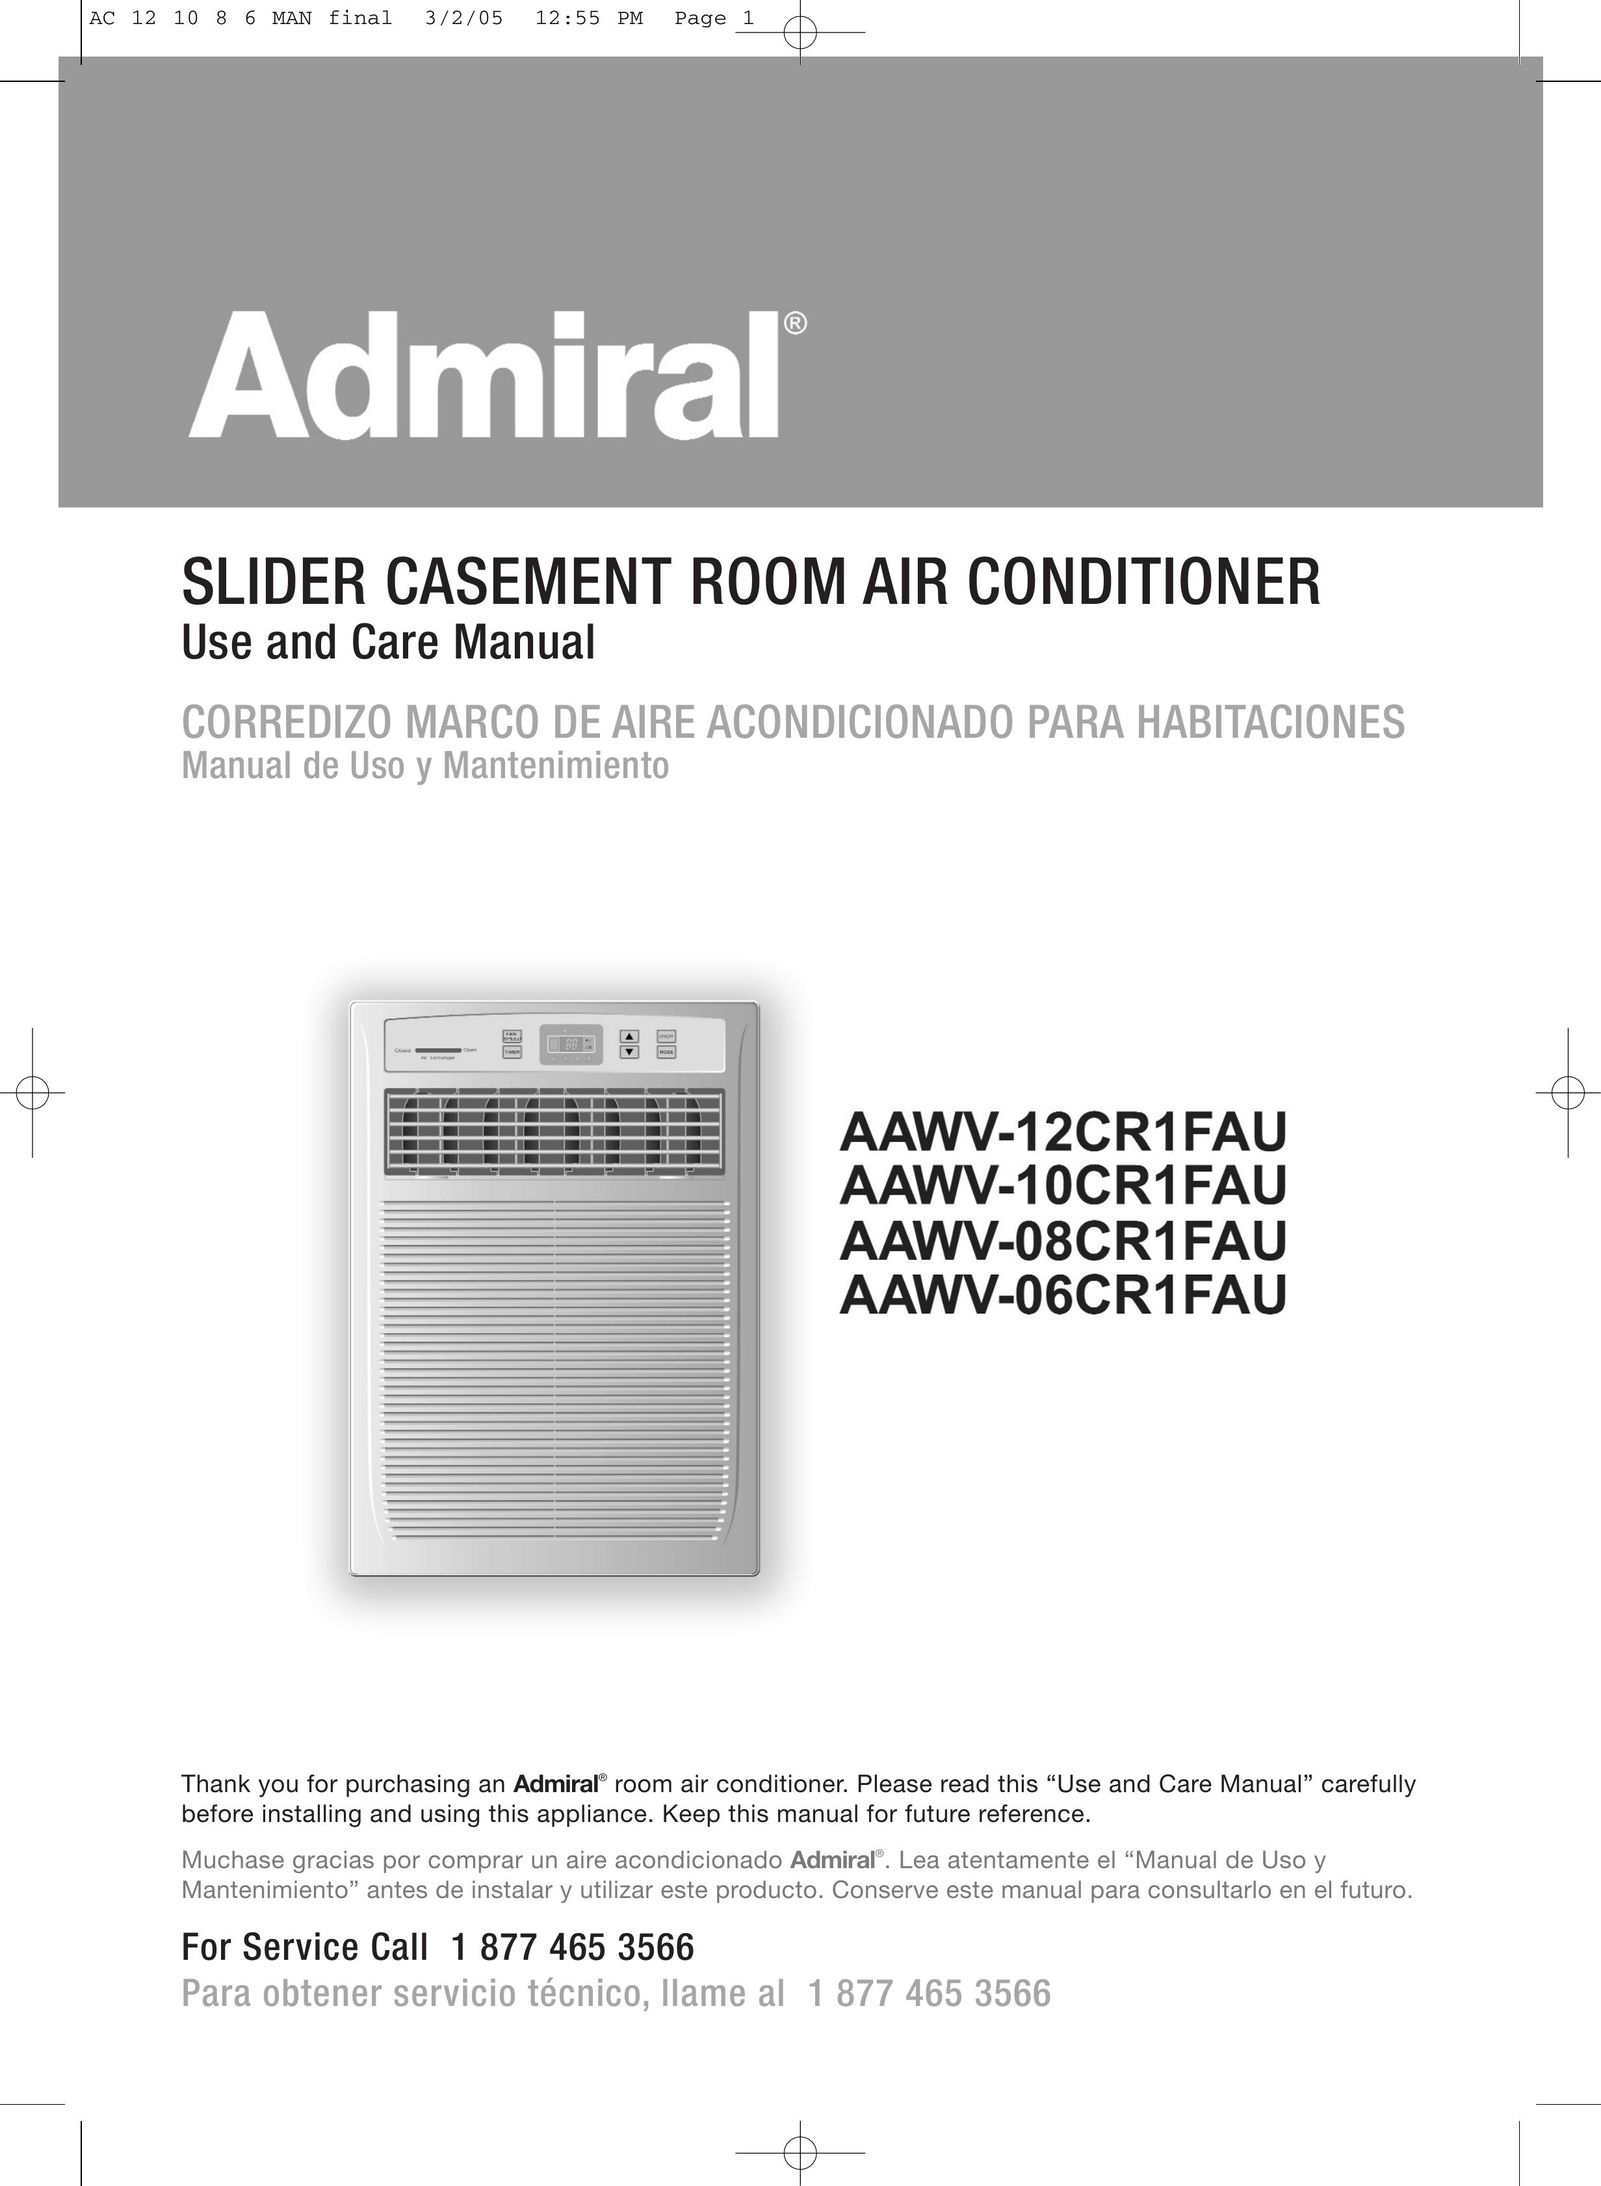 Admiral AAWV-06CR1FAU Air Conditioner User Manual (Page 1)